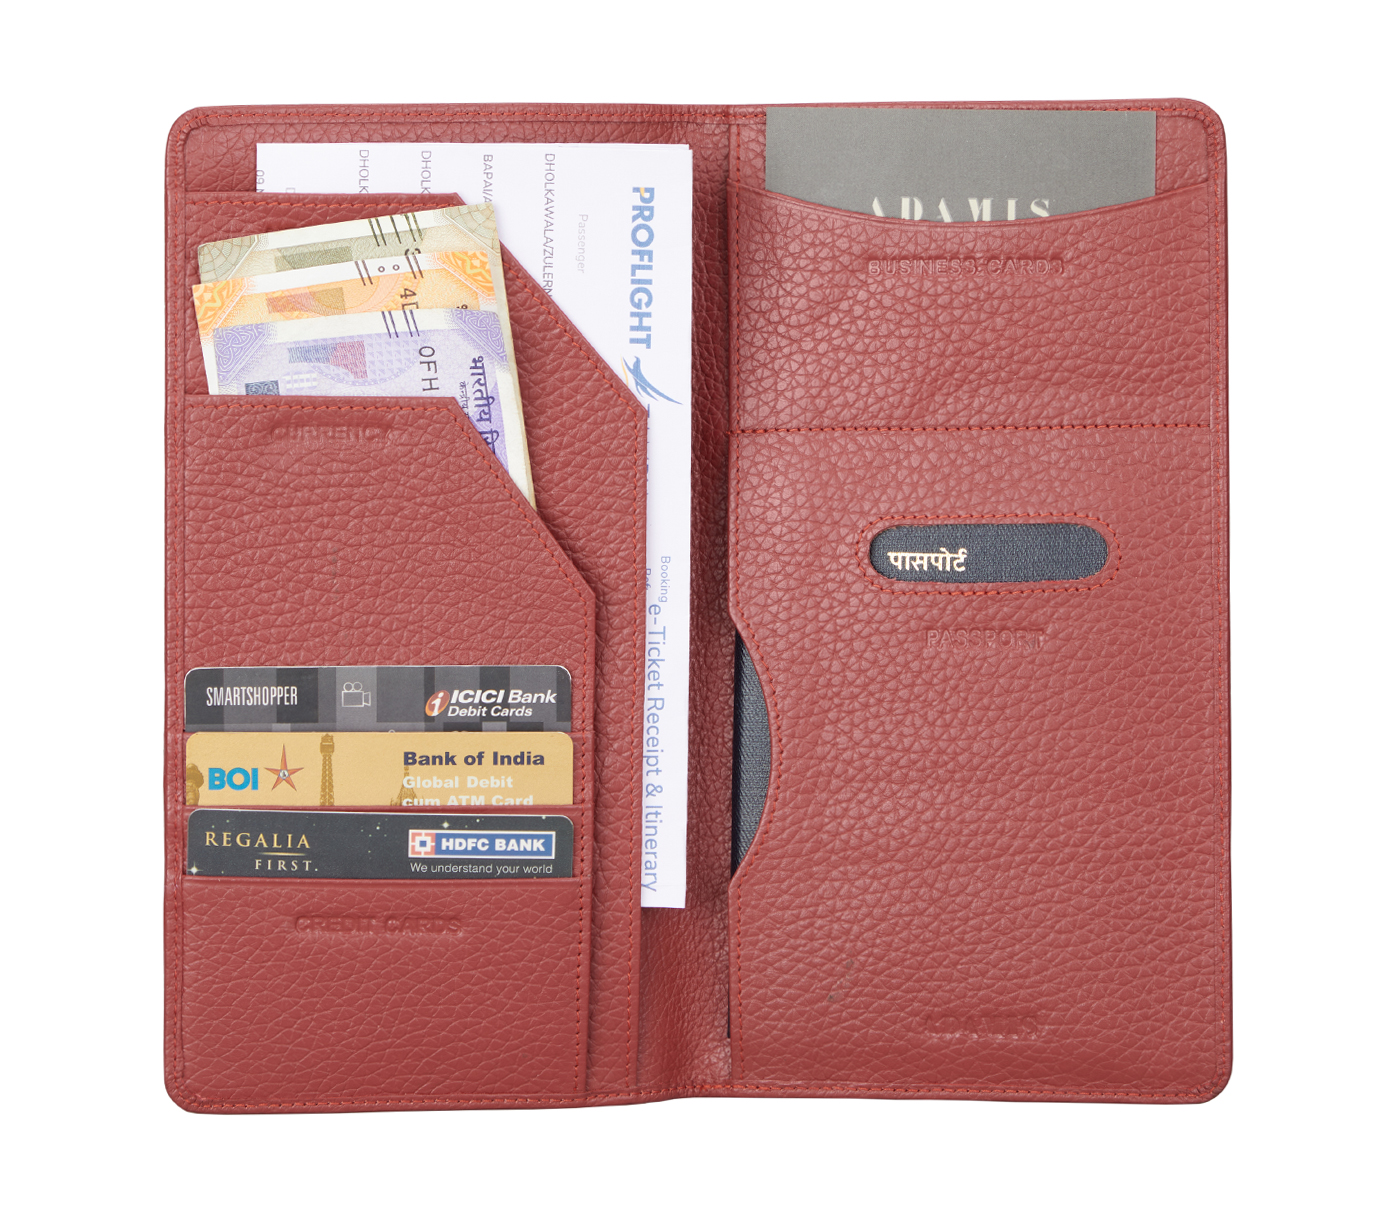 W85-Rafel-Travel document wallet in Genuine Leather - Red